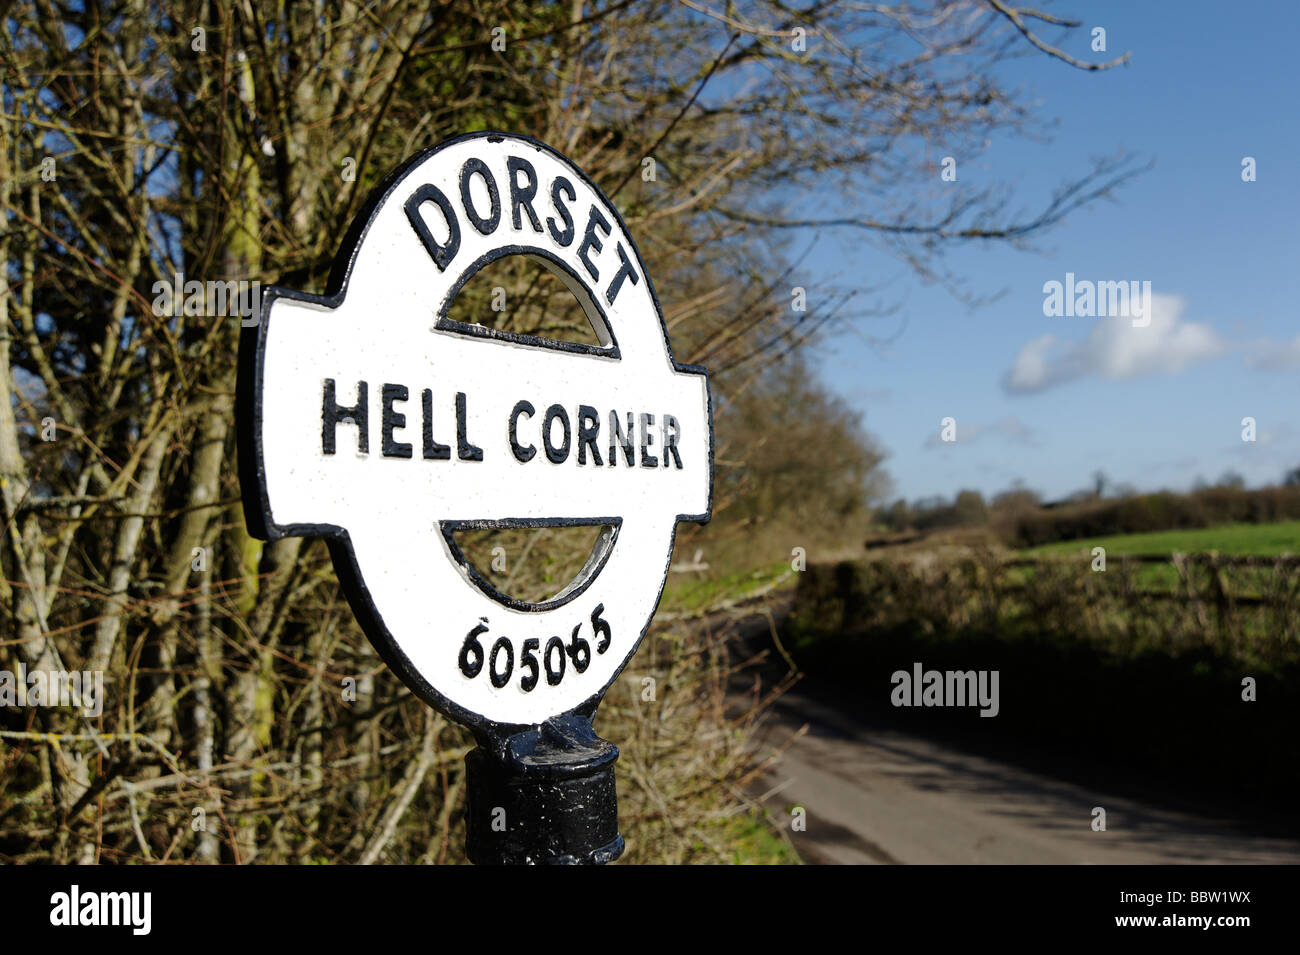 Hell Corner road sign in rural Dorset South west England UK Stock Photo